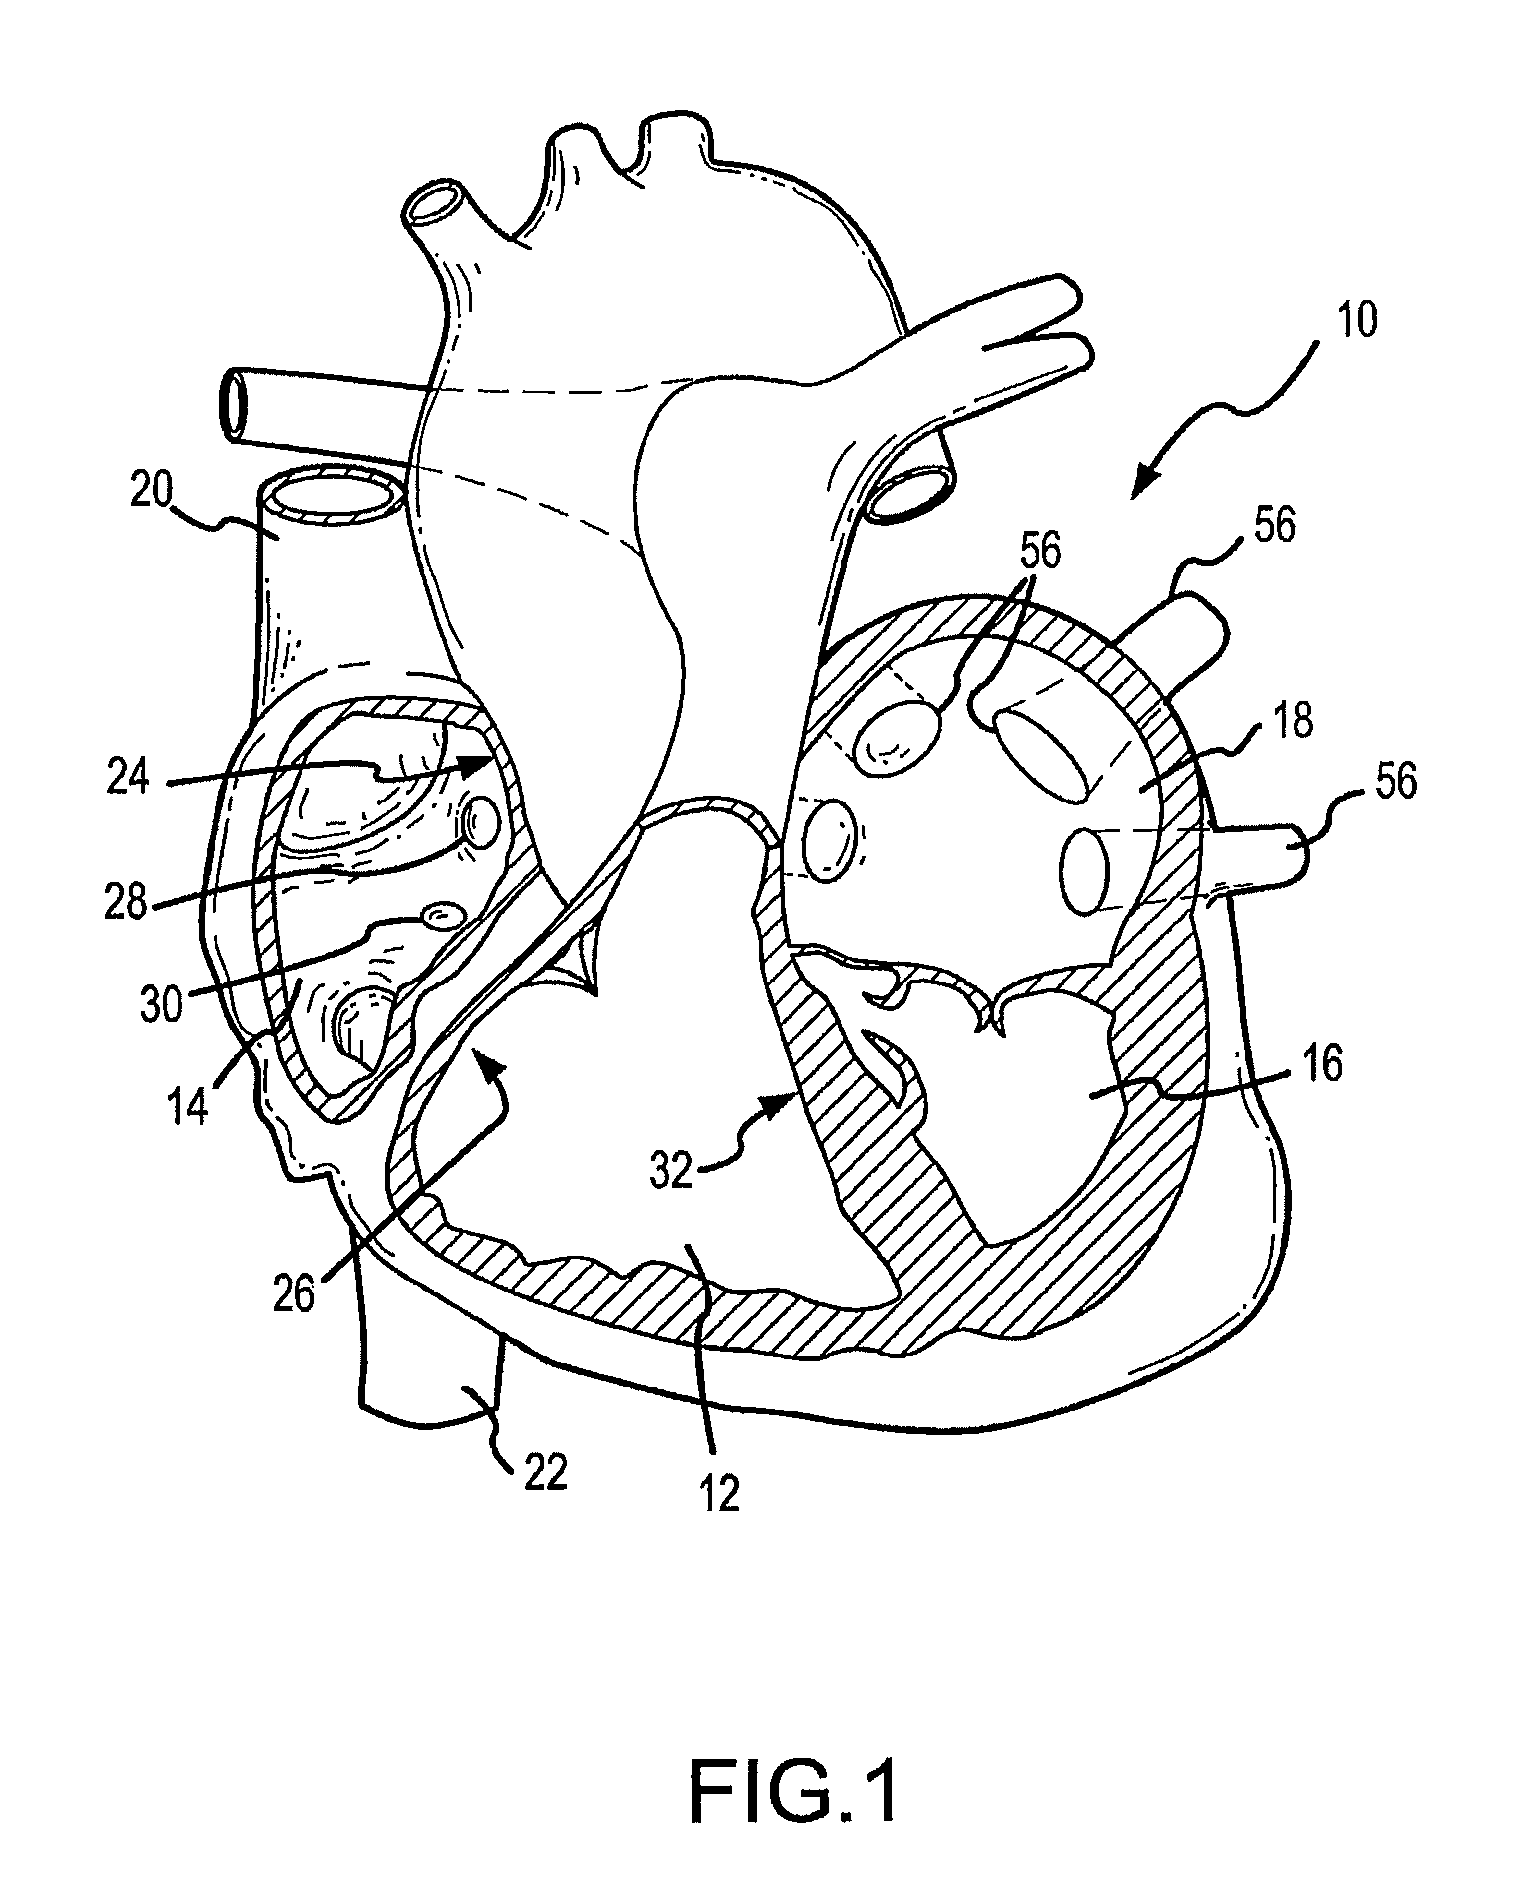 Medical device with flexible printed circuit